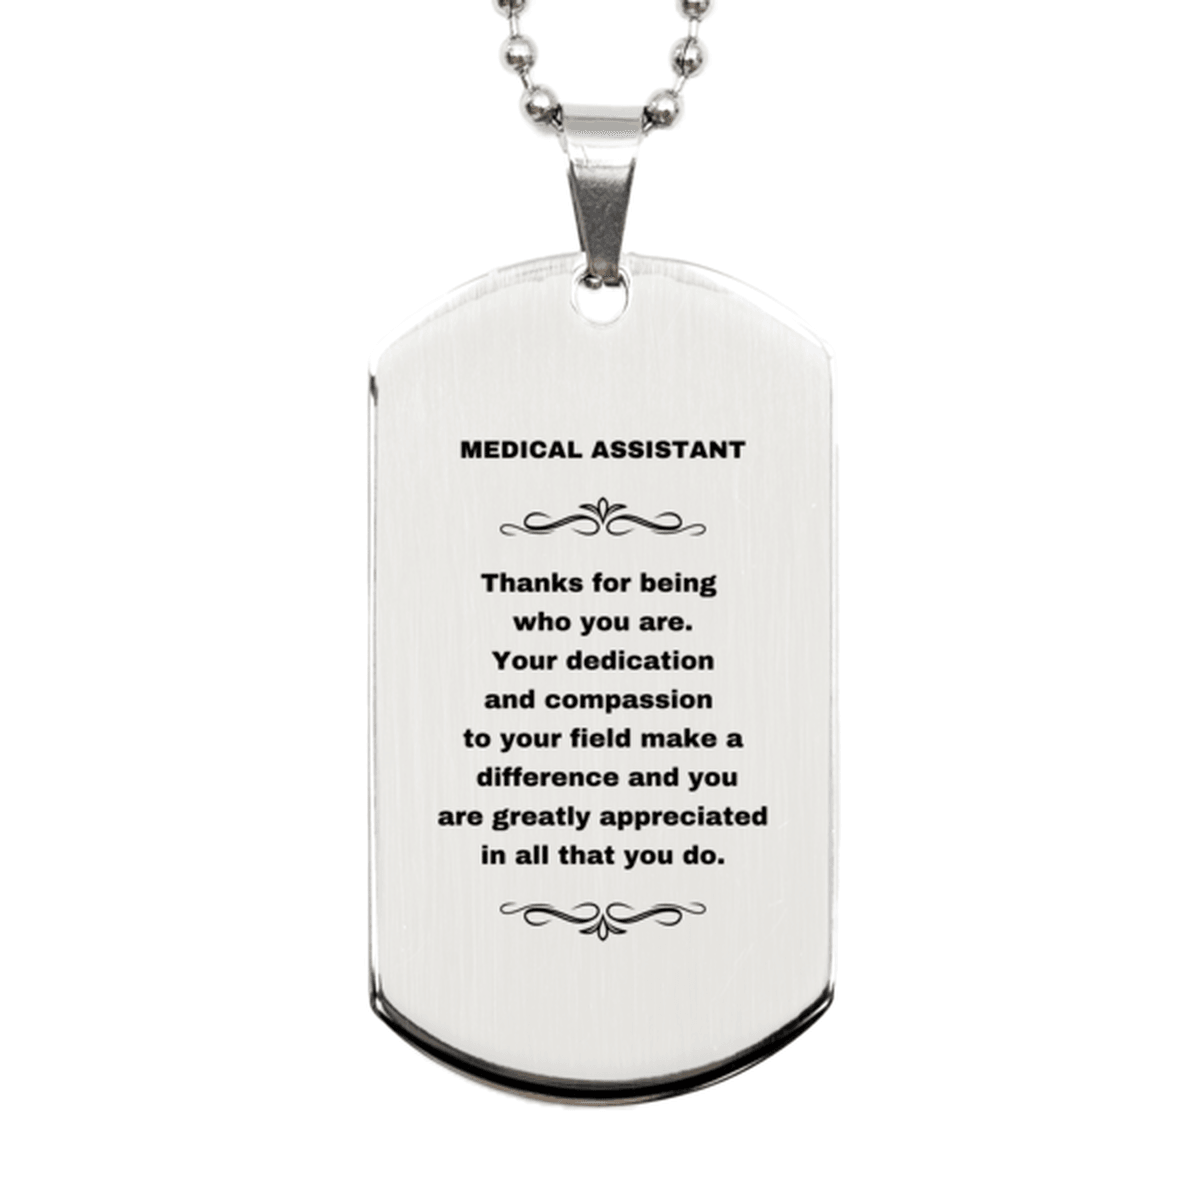 Medical Assistant Silver Dog Tag Necklace - Thanks for being who you are - Birthday Christmas Jewelry Gifts Coworkers Colleague Boss - Mallard Moon Gift Shop